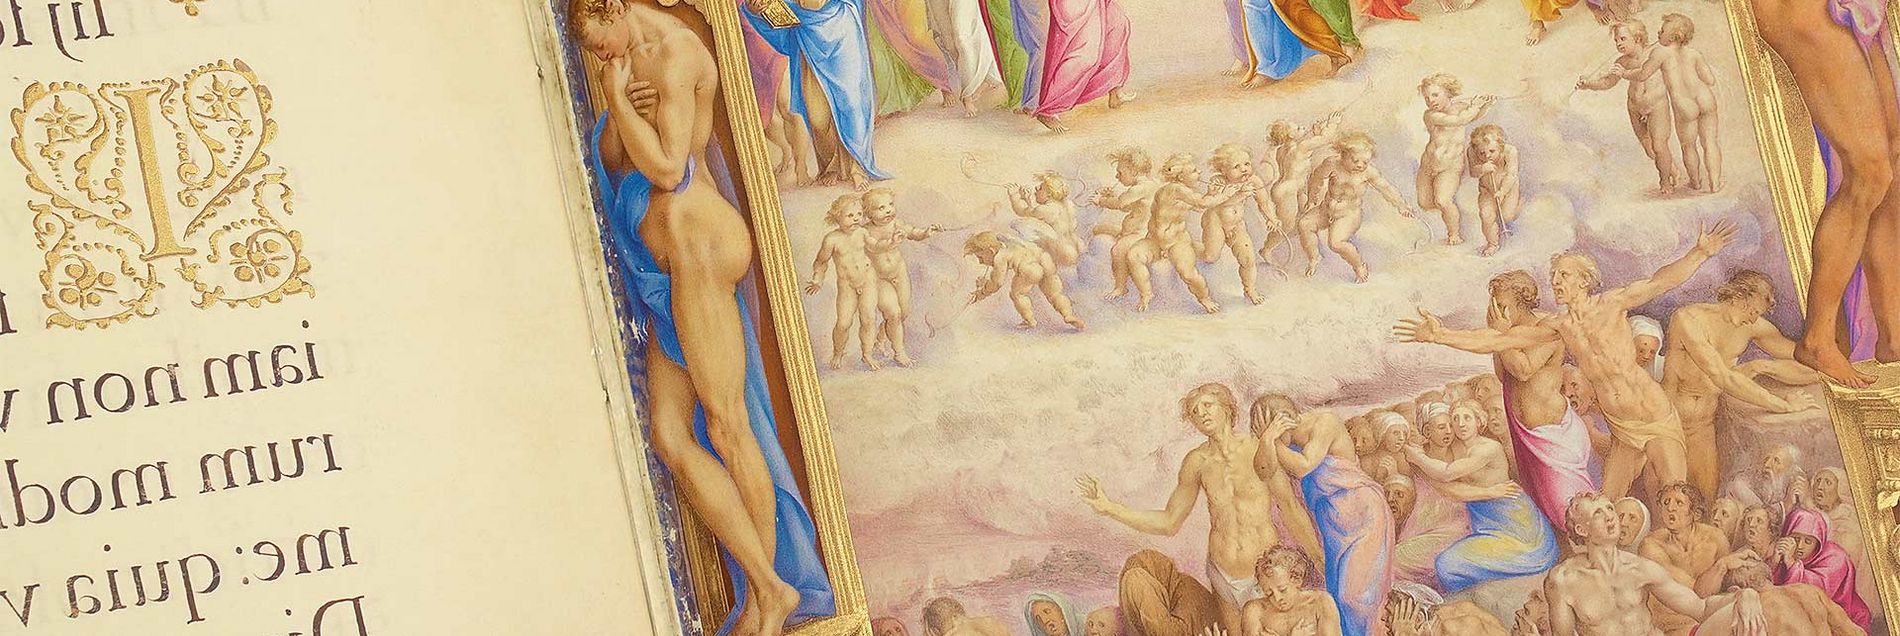 <i>“The magnificent Lectionary created by Giulio Clovio for use in the Sistine Chapel”</i>